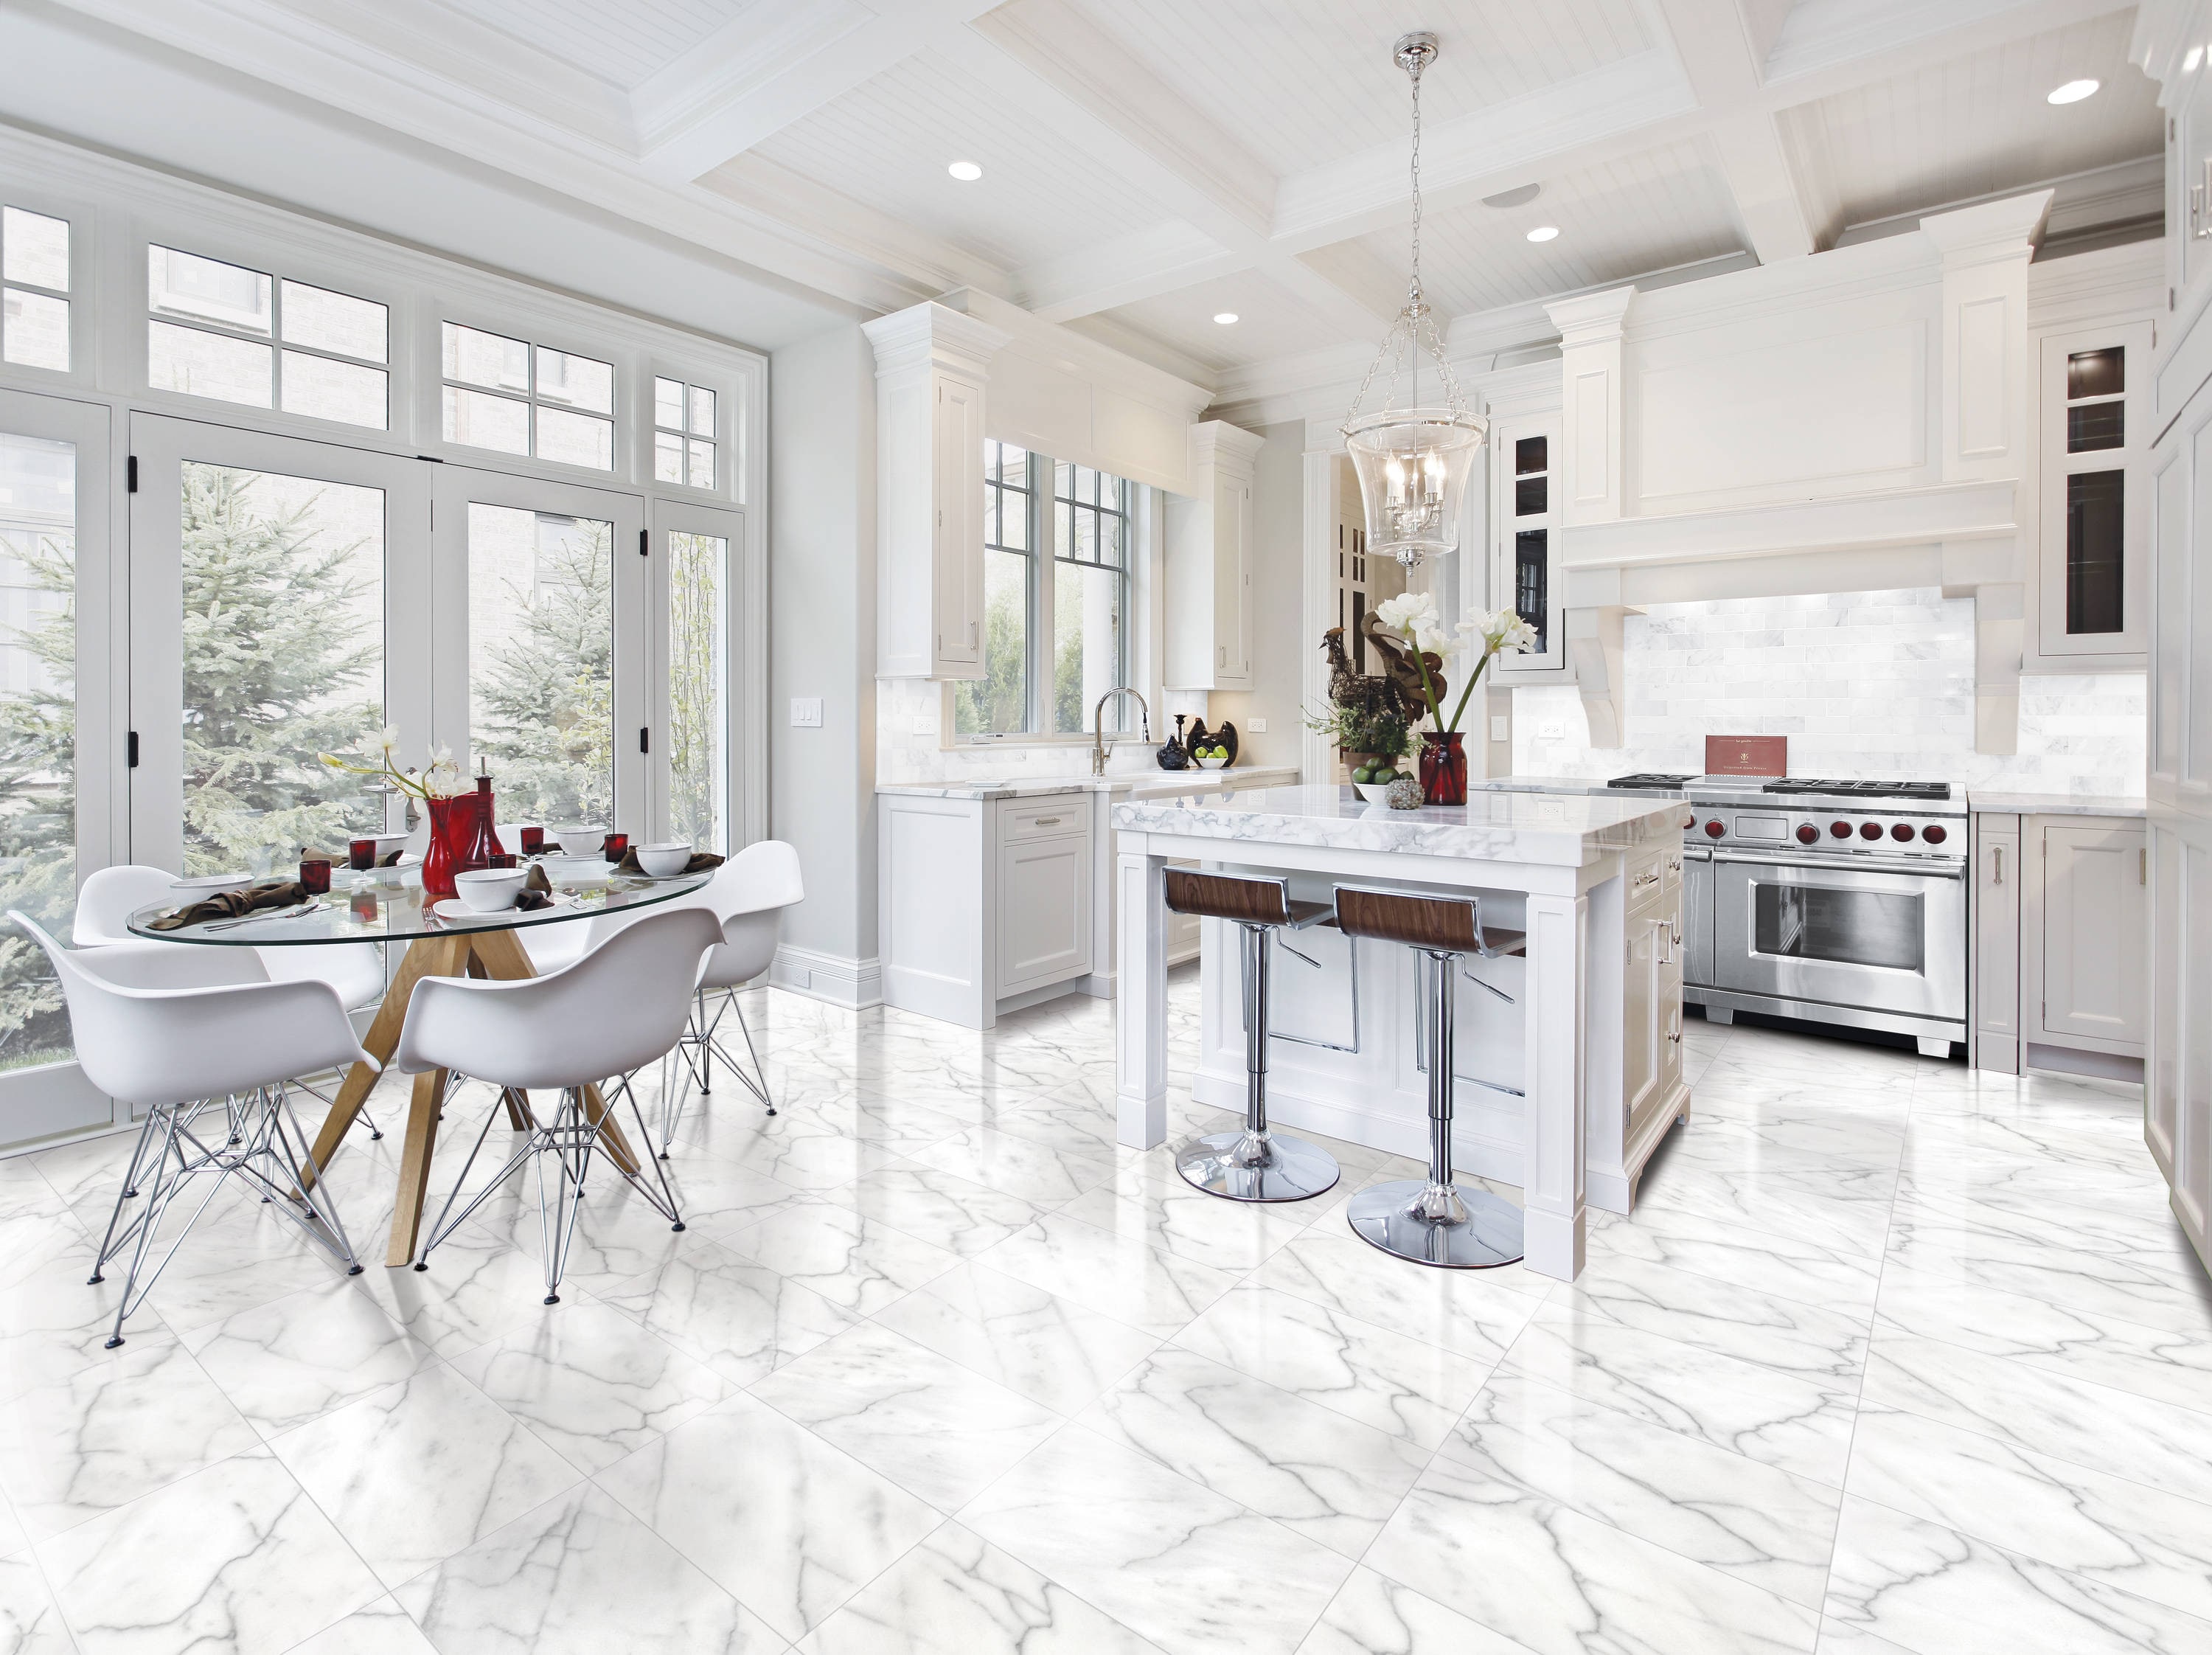 Marble Floors In Kitchen Pictures – Flooring Tips